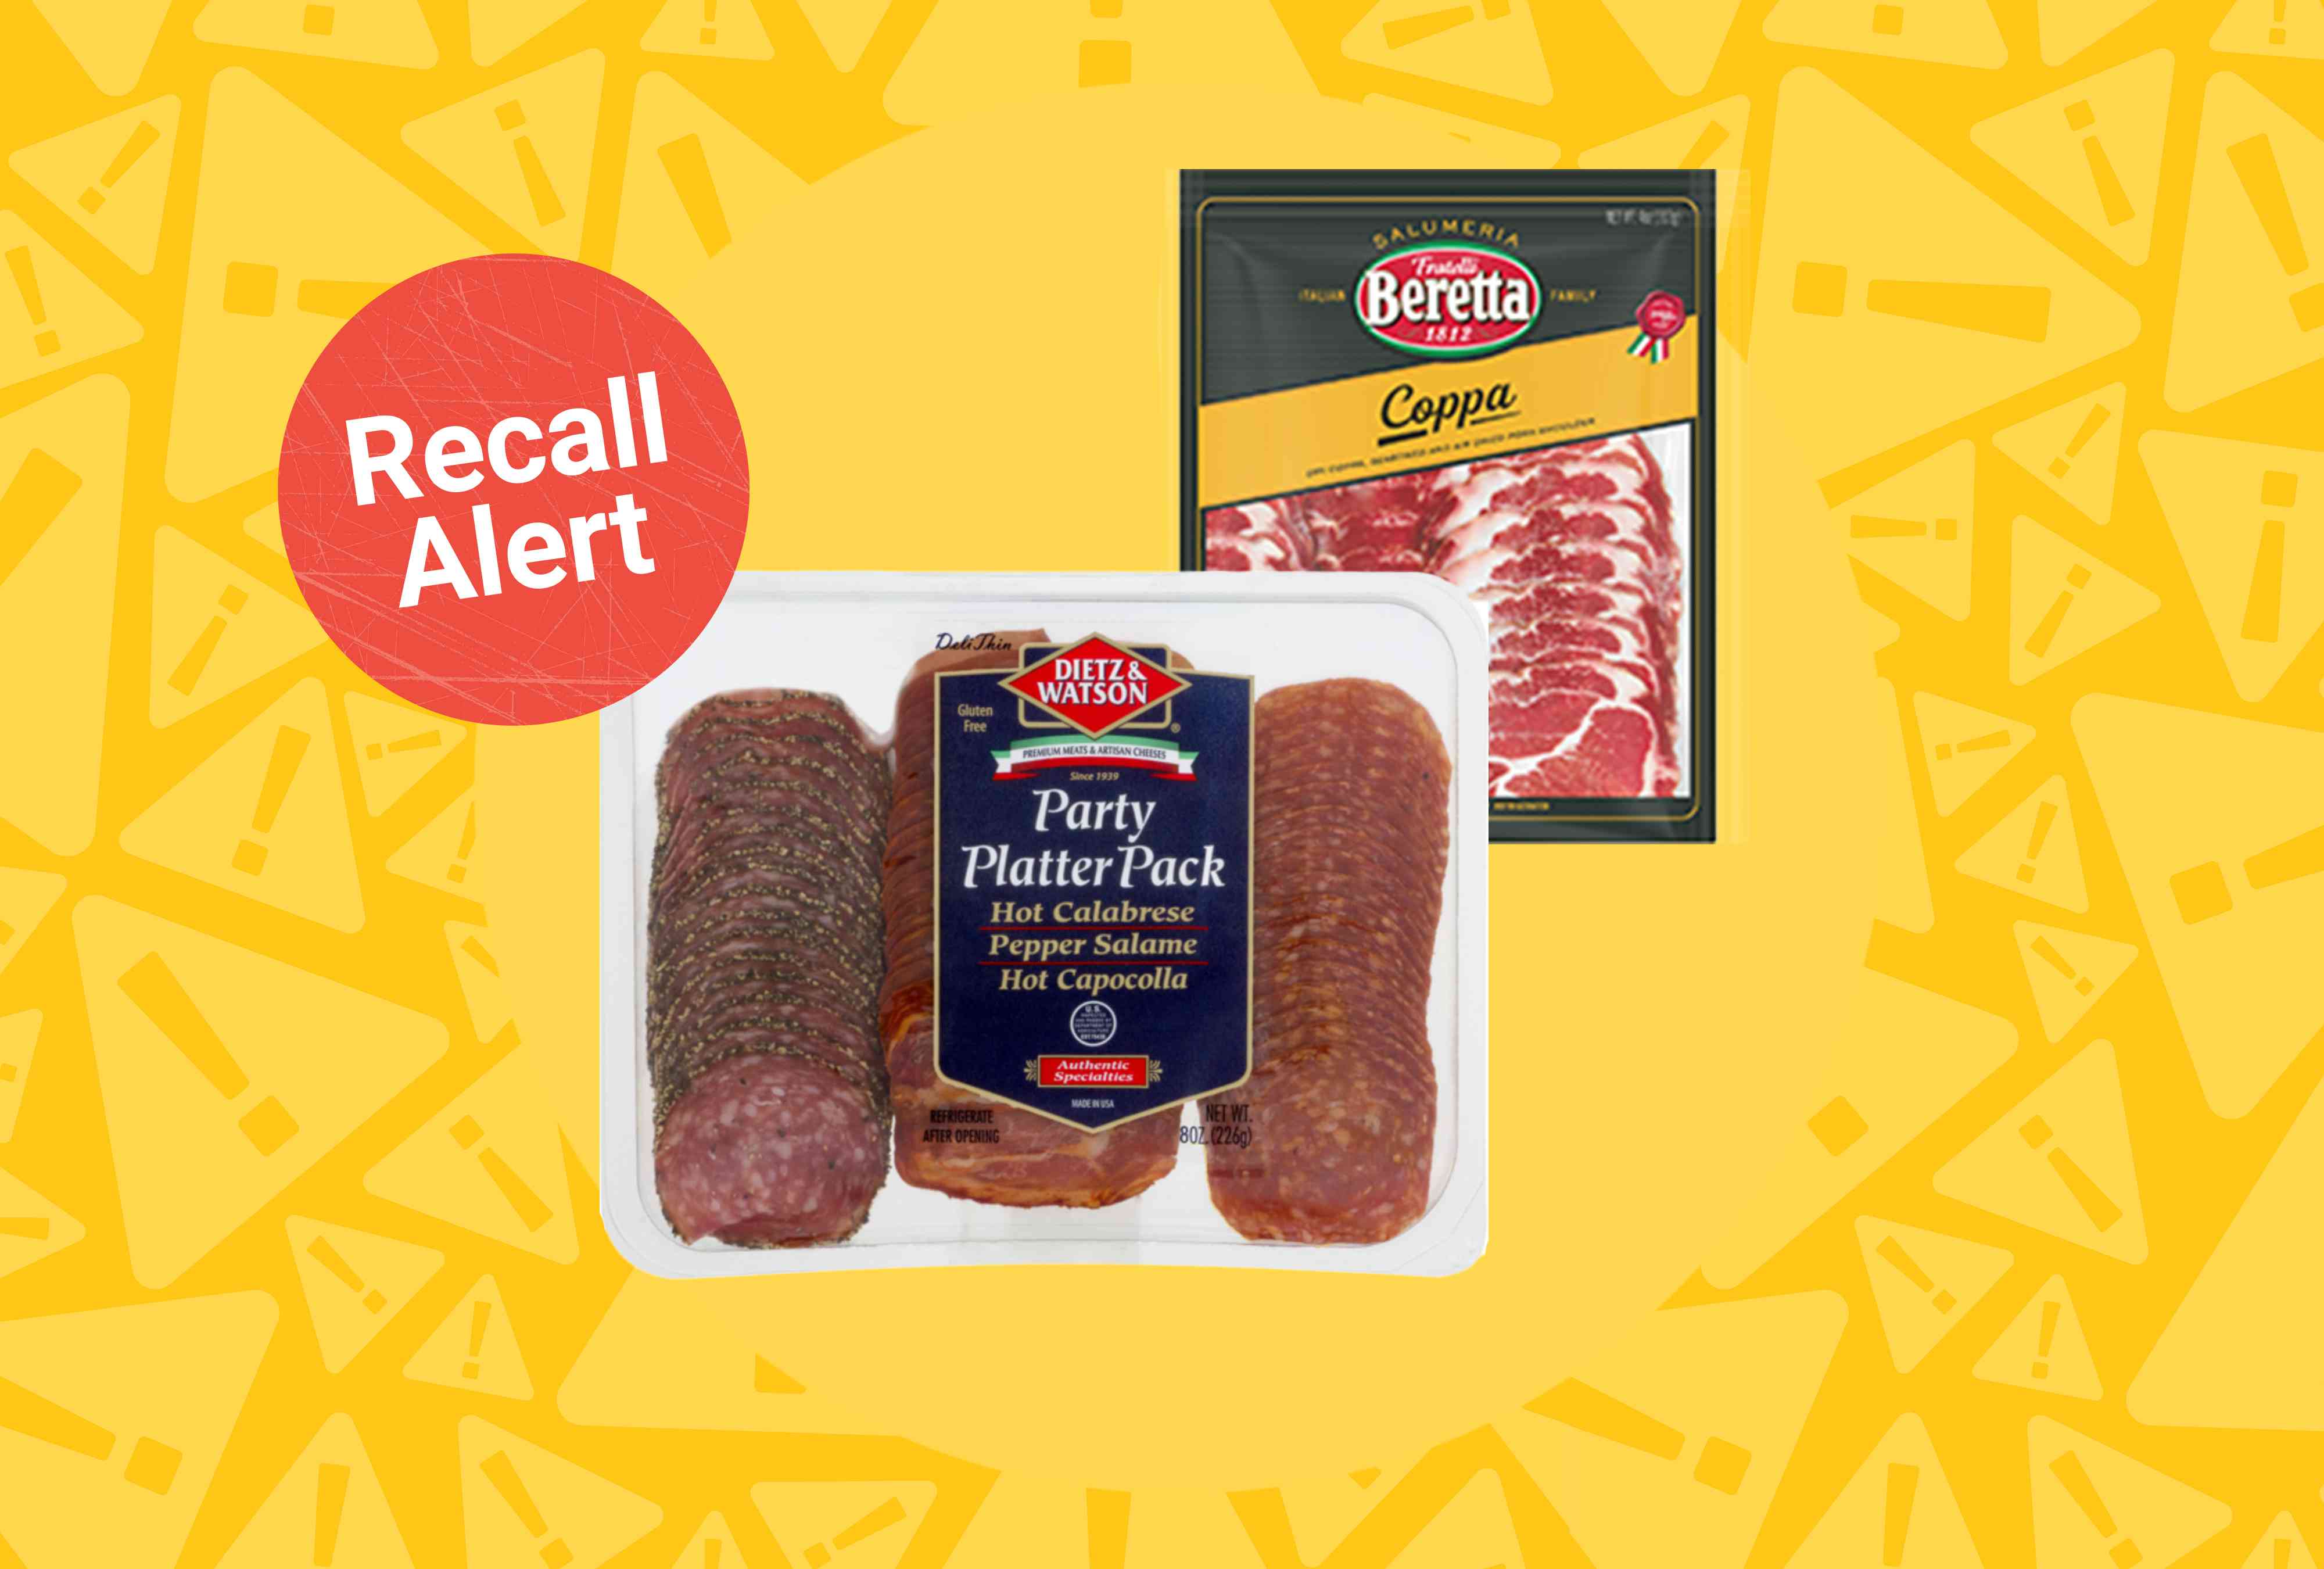 charcuterie meats sold at aldi, lidl and more recalled due to salmonella risk